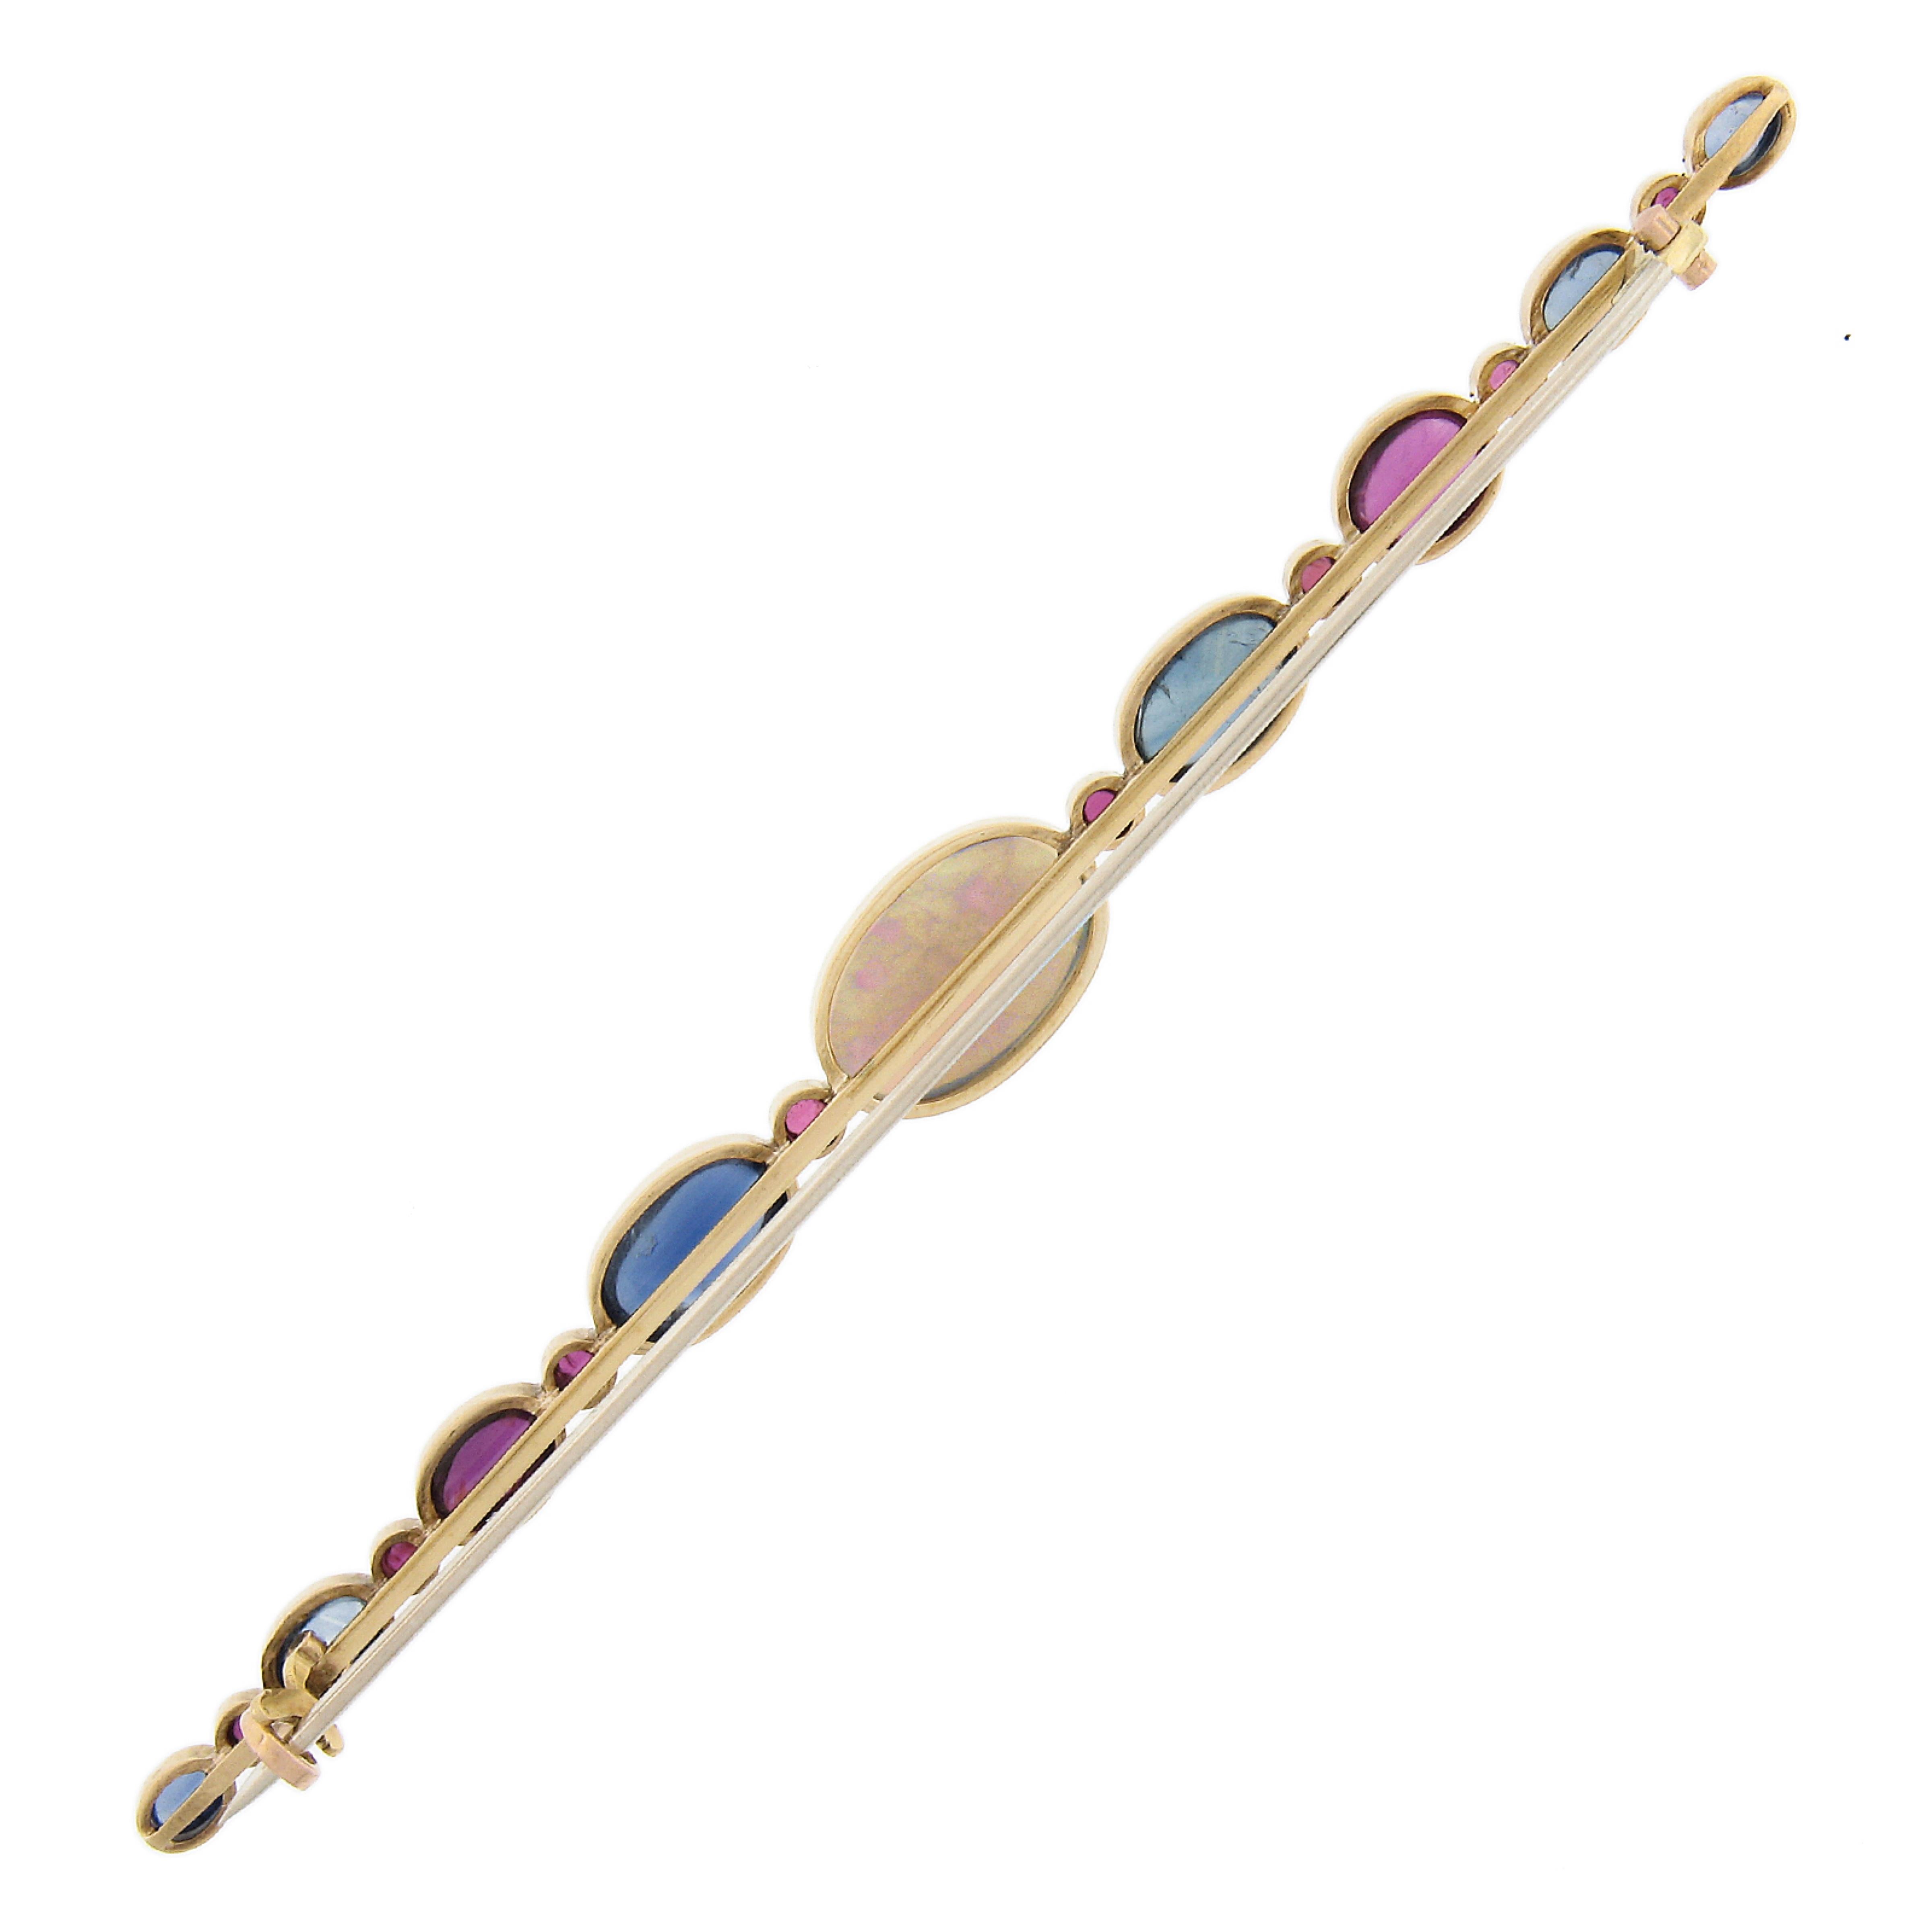 Here we have an antique French Masterpiece!  This VERY long bar pin features unheated sapphires and rubies with an opal center. The come together in an alternating pattern to create this long one of a kind pin. Must see and hold! Exceptional!